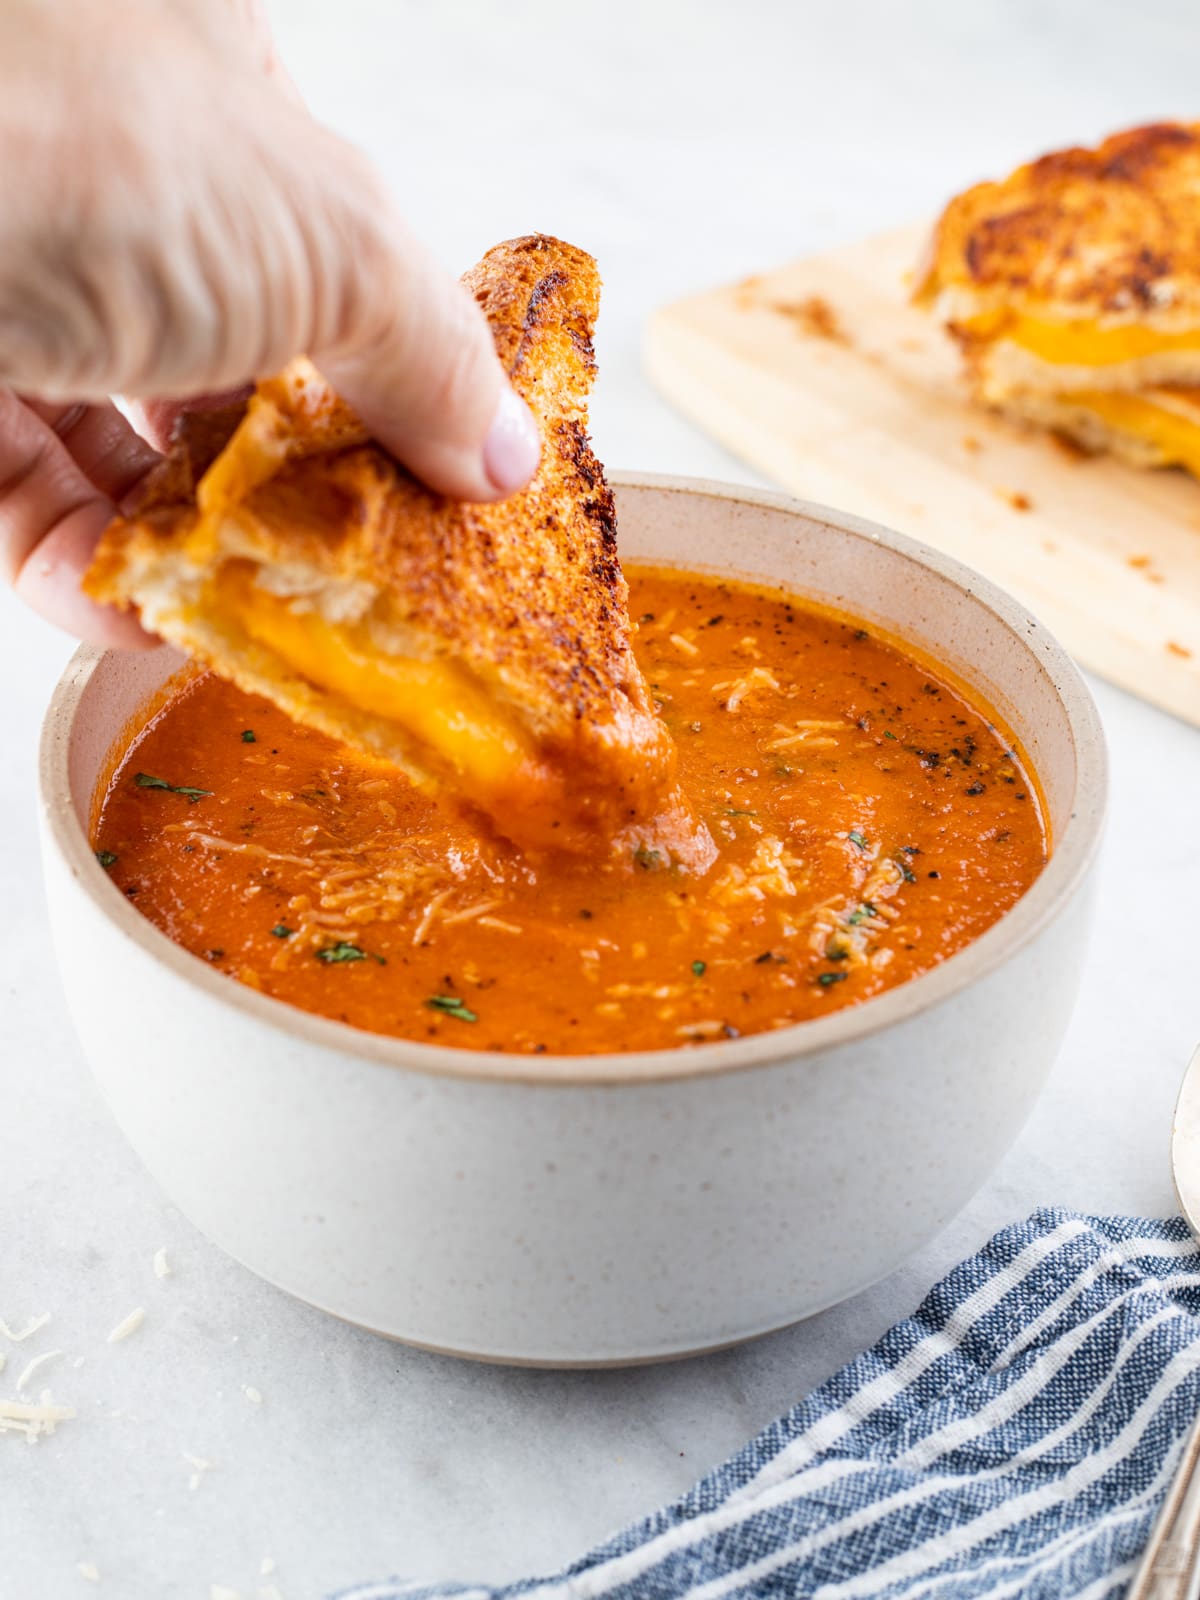 Grilled cheese sandwich being dipped into a bowl of tomato soup.